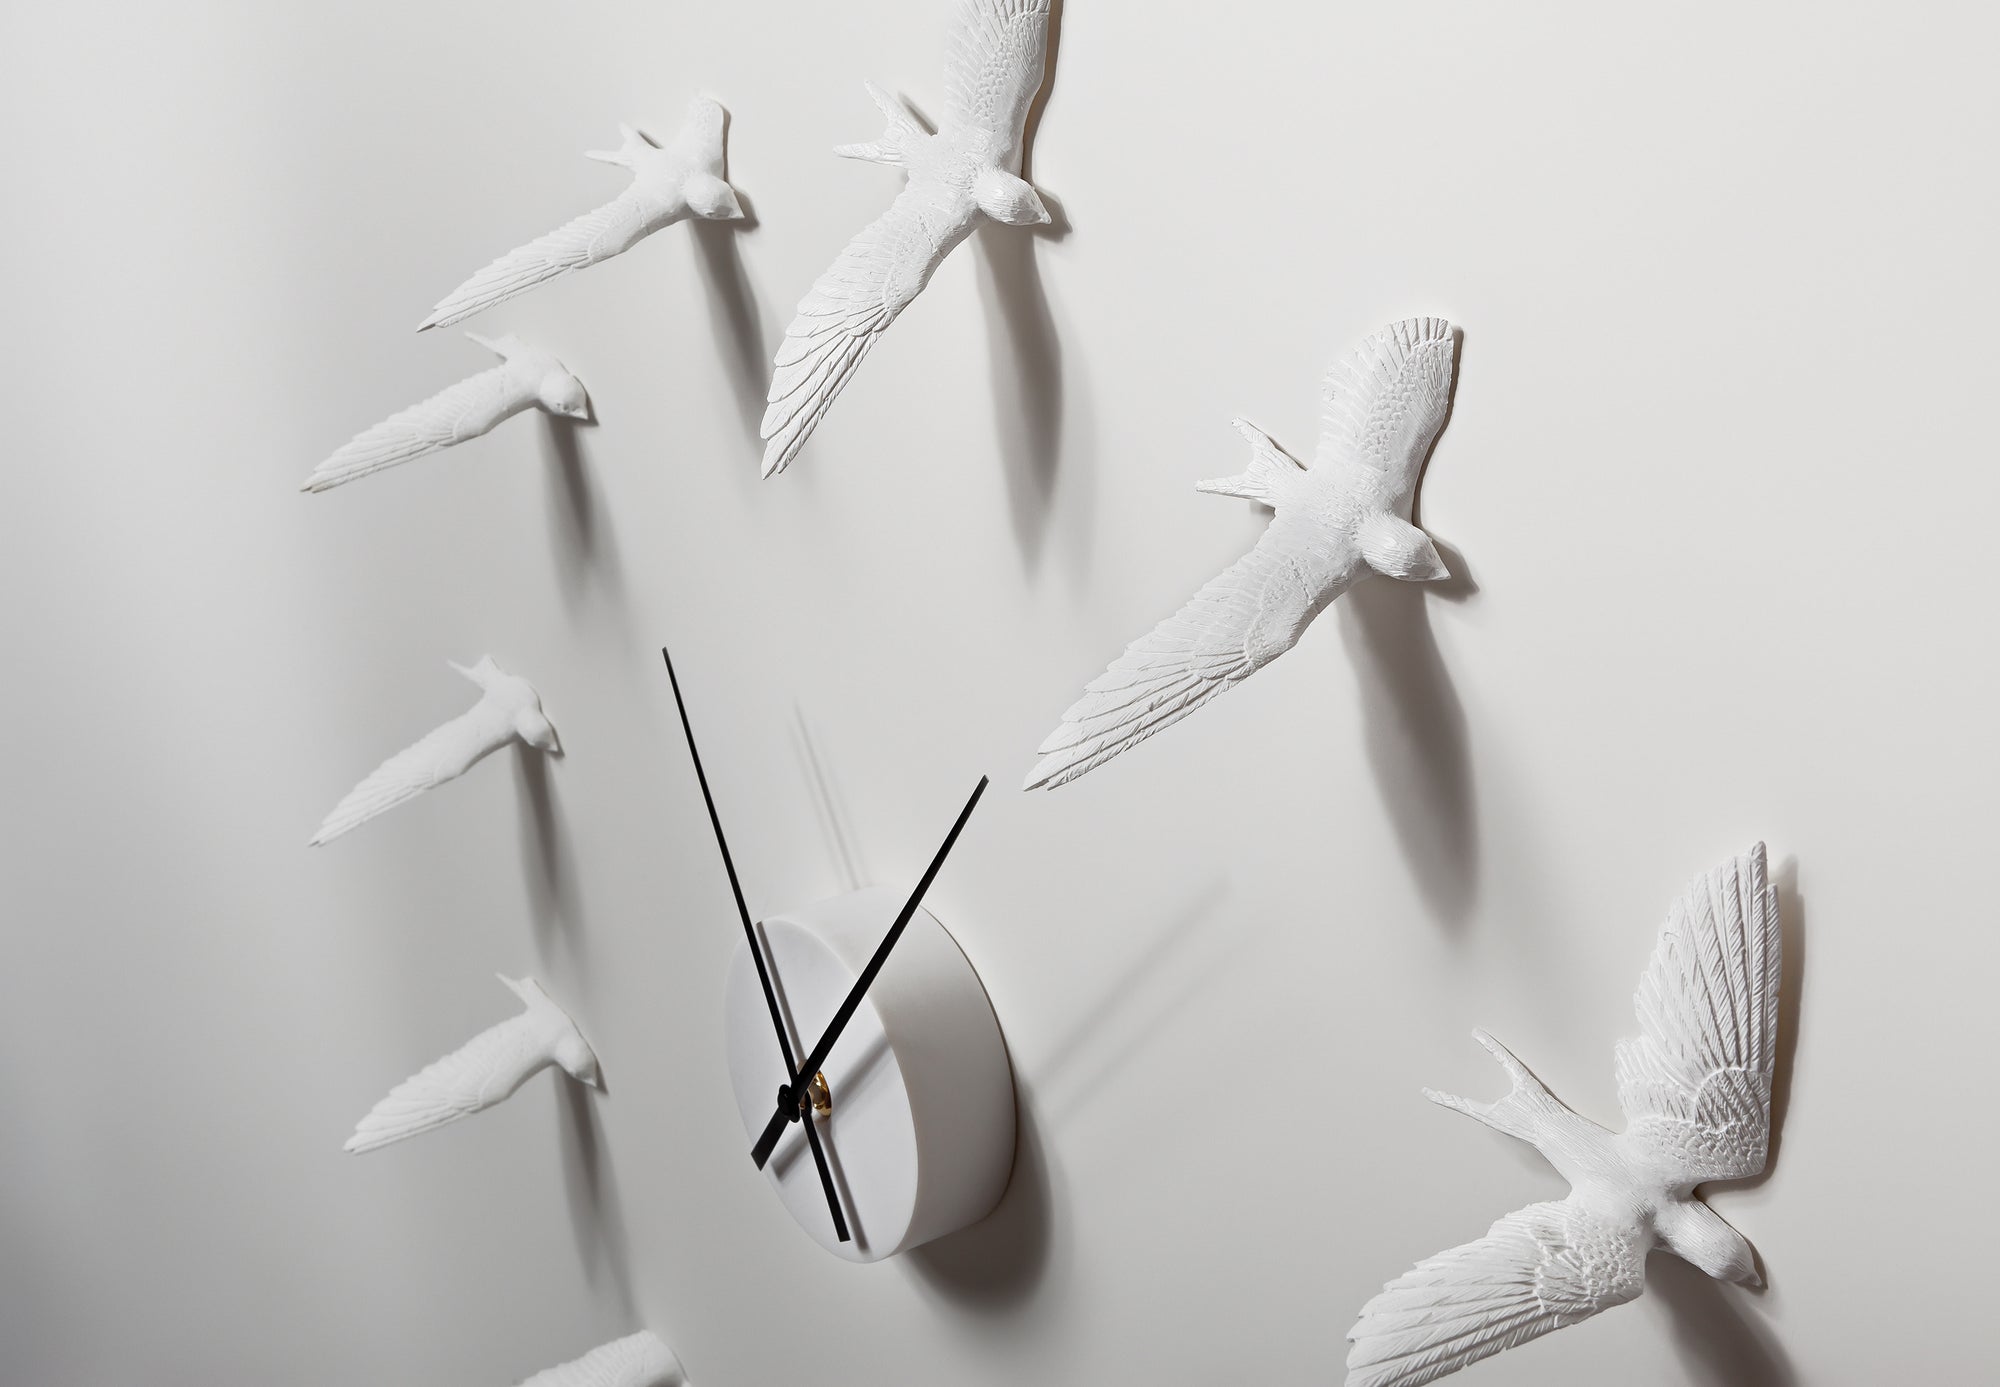 Our wall clock is the perfect gift and is perfect for bird watching gifts